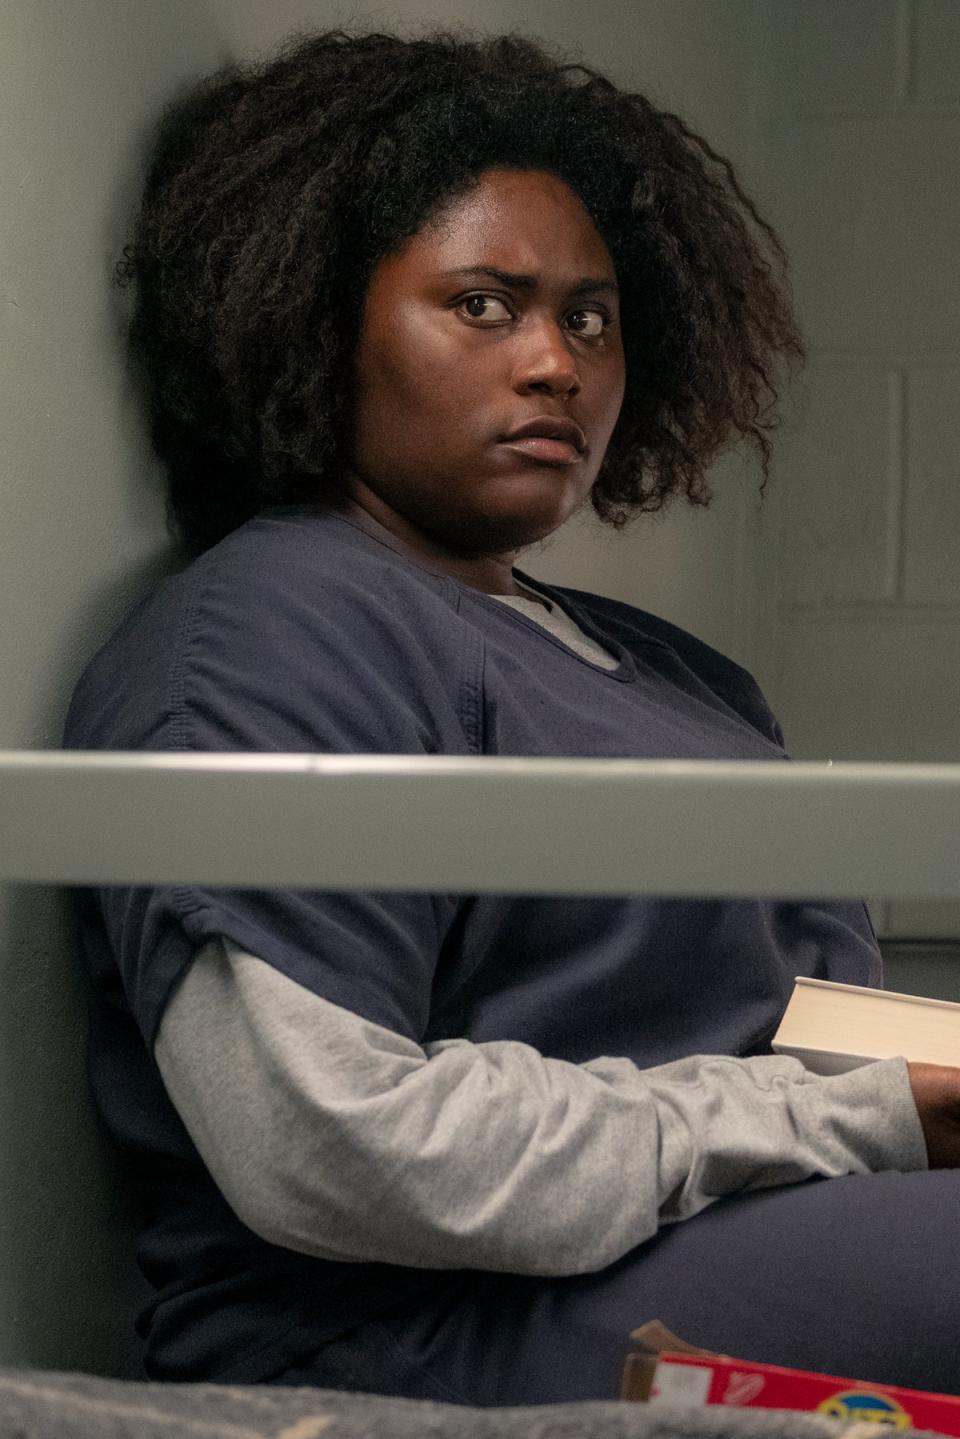 Life-changing: Danielle Brooks as Taystee in Netflix’s ‘Orange Is the New Black’ (Netflix)